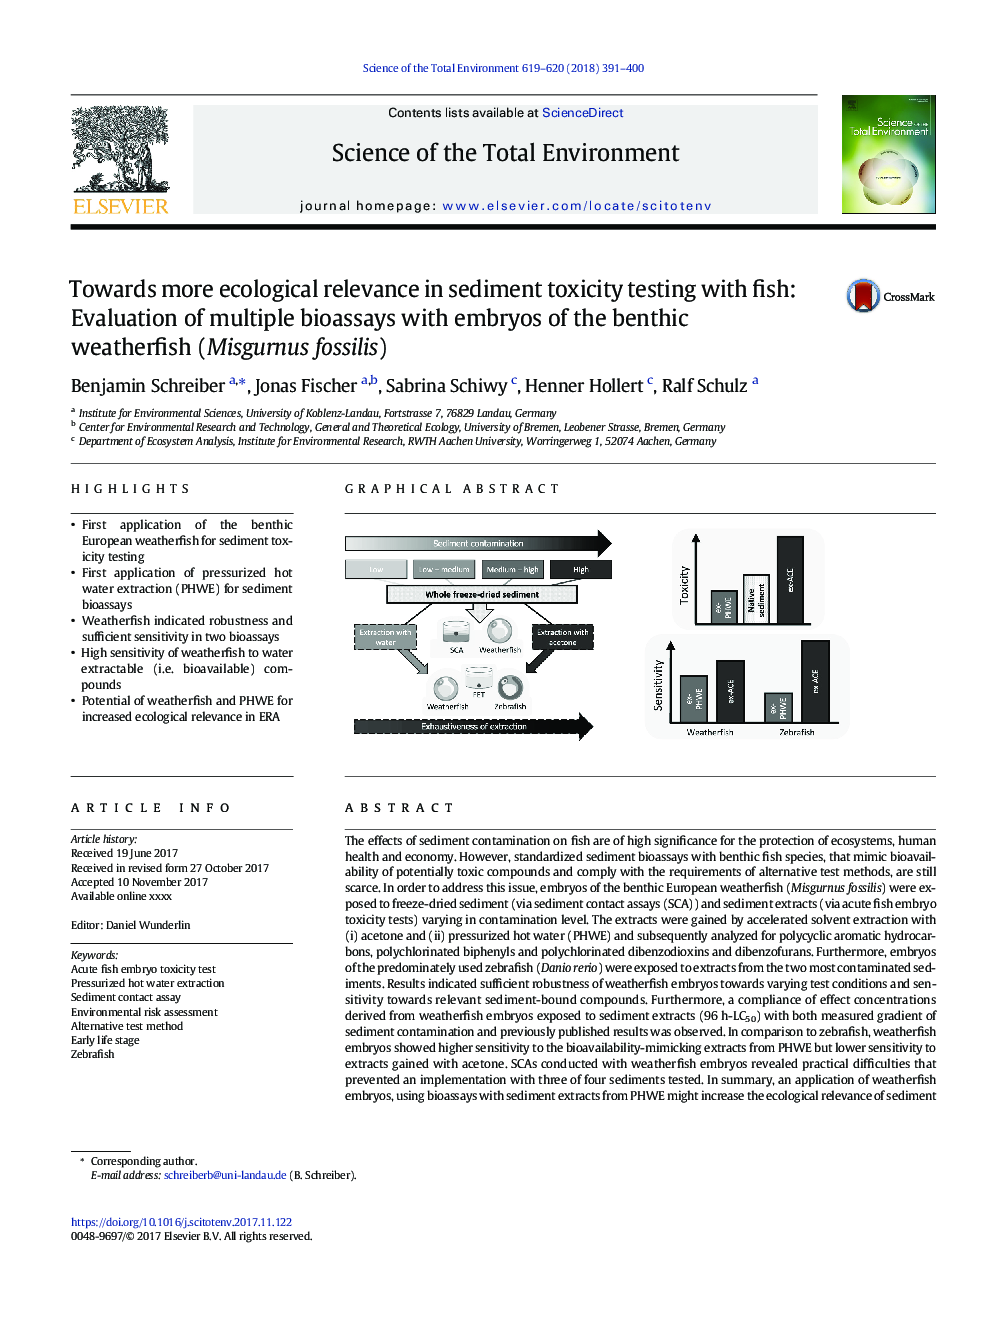 Towards more ecological relevance in sediment toxicity testing with fish: Evaluation of multiple bioassays with embryos of the benthic weatherfish (Misgurnus fossilis)